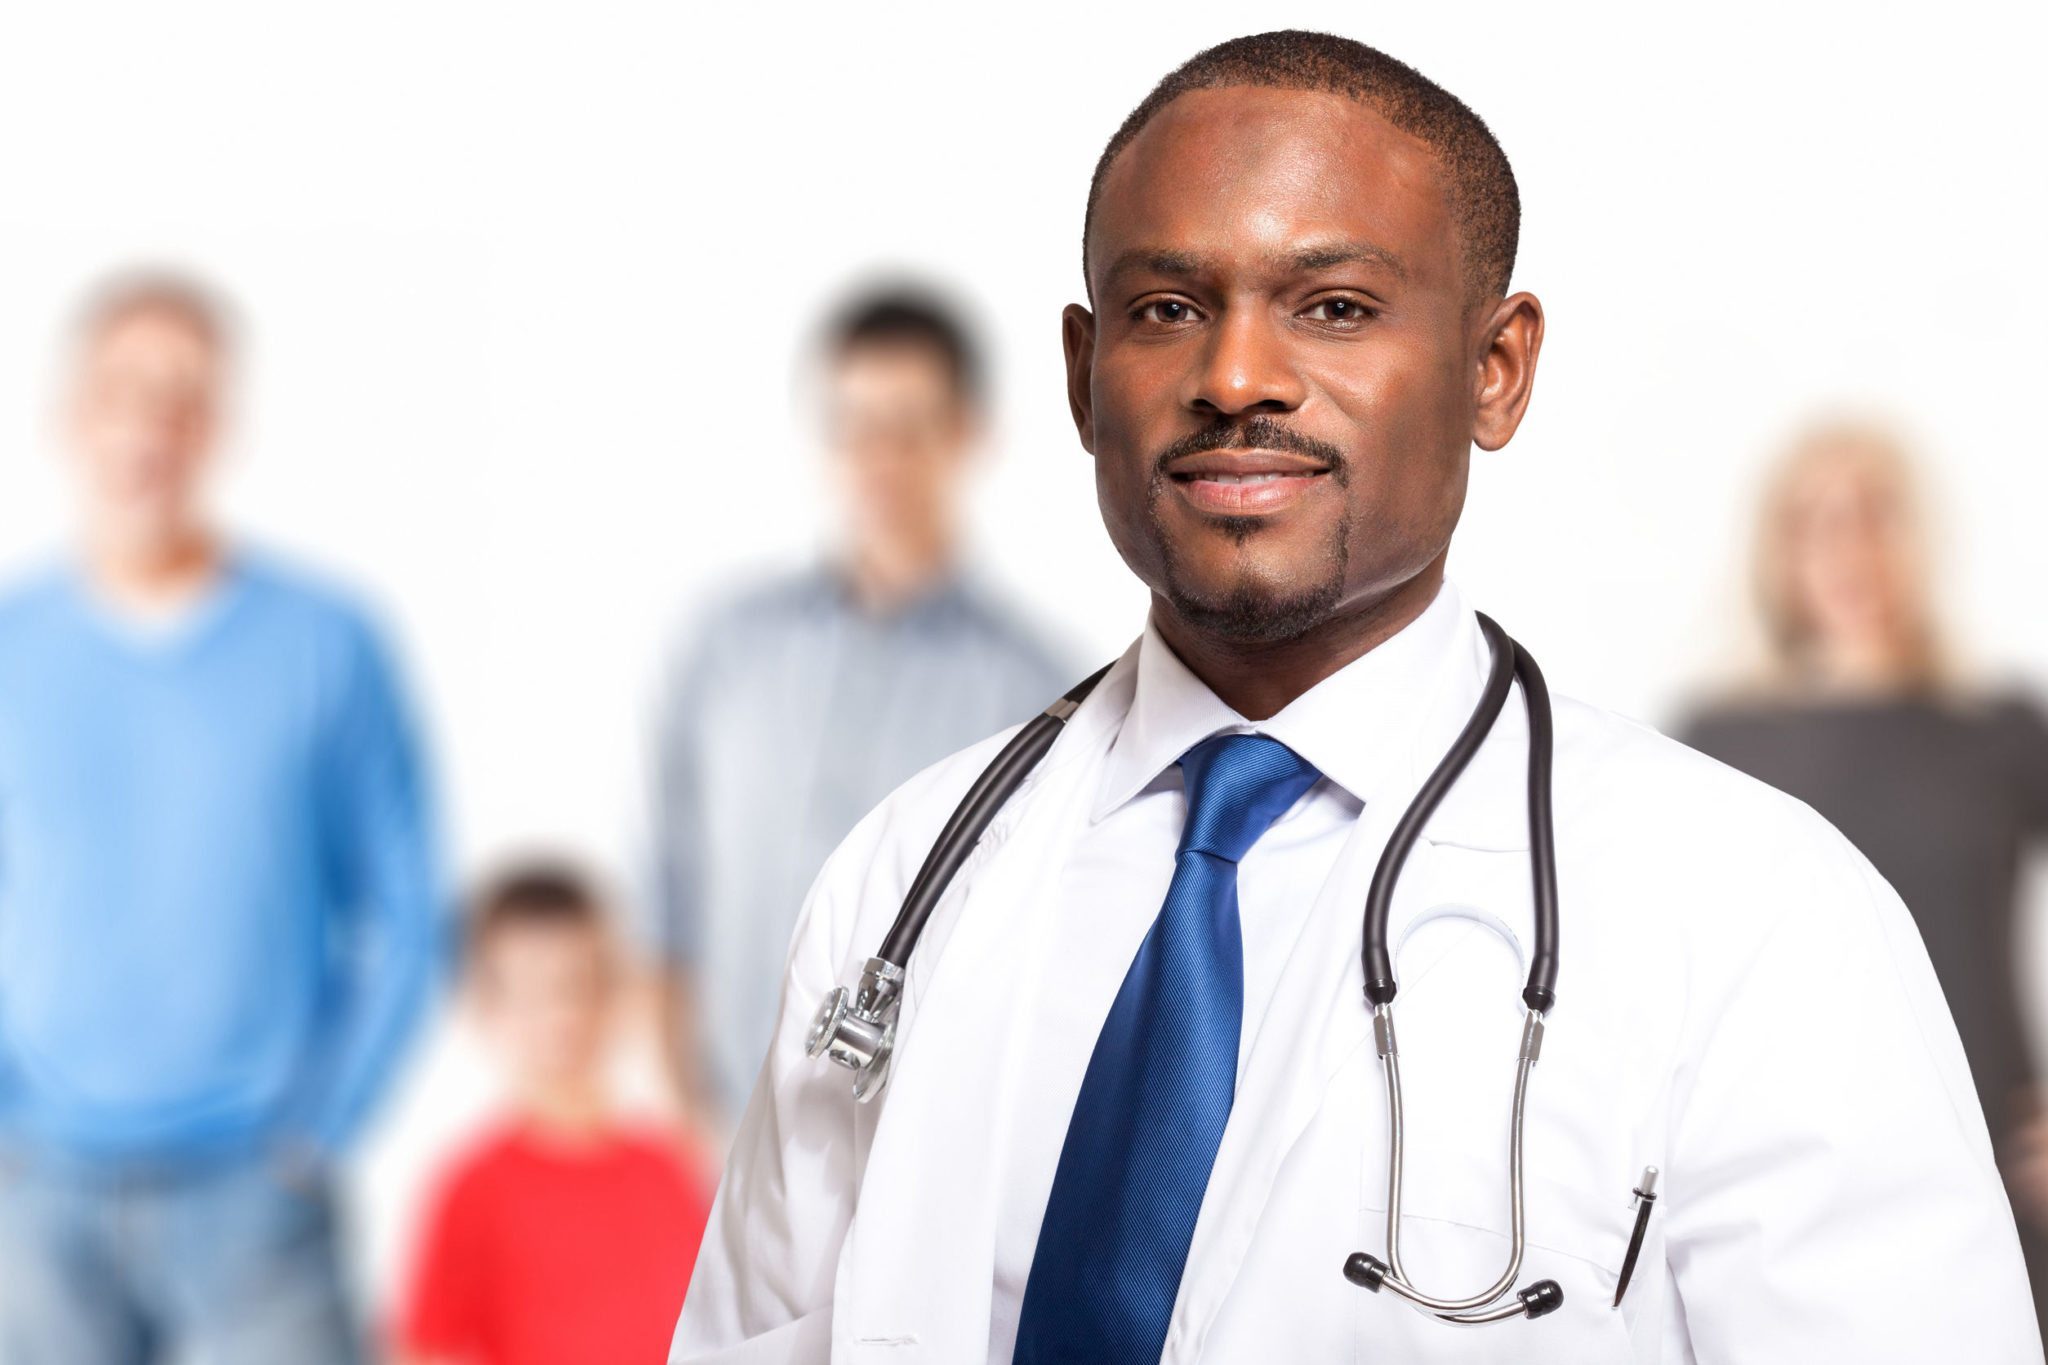 What Are The Educational Requirements For A Doctor